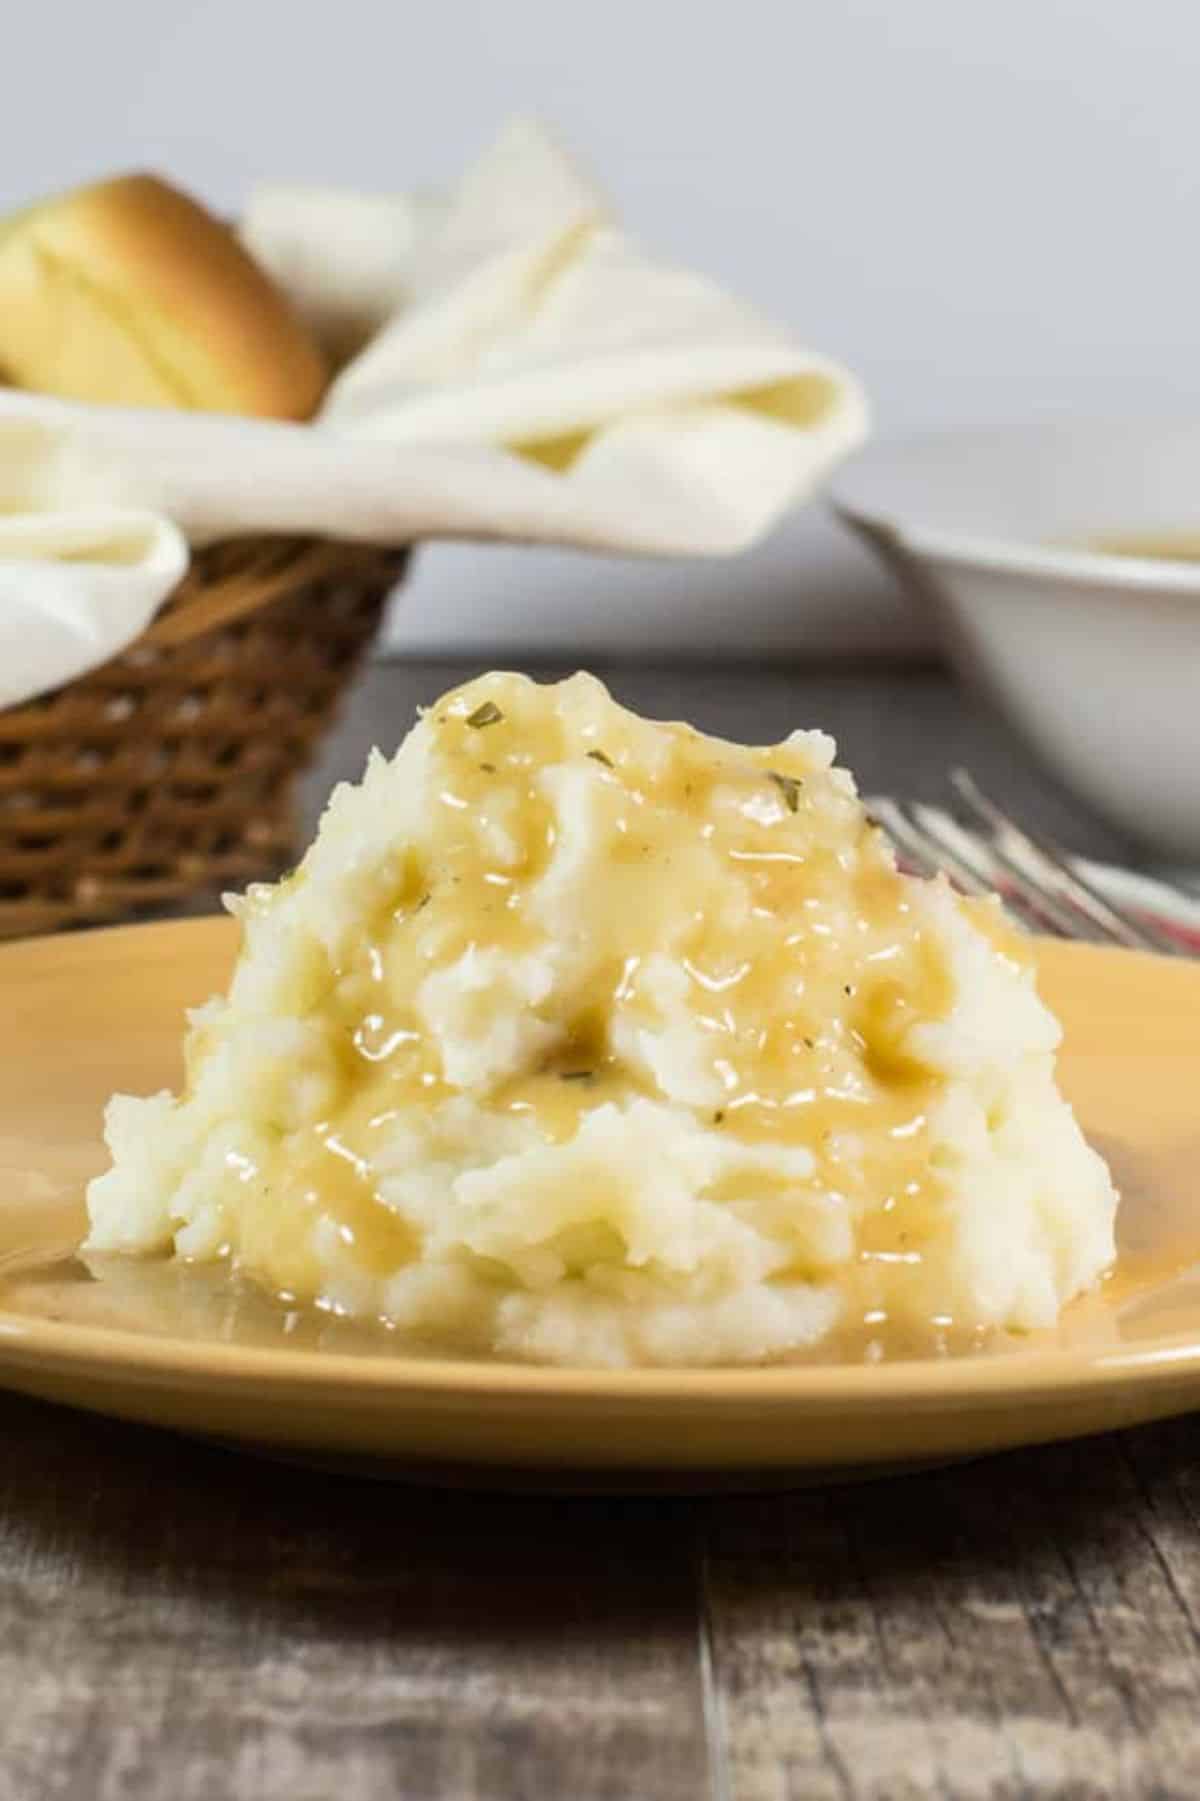 Juicy Gluten-Free & Vegetarian Savory Herb Gravy on mashed potatoes on a plate.